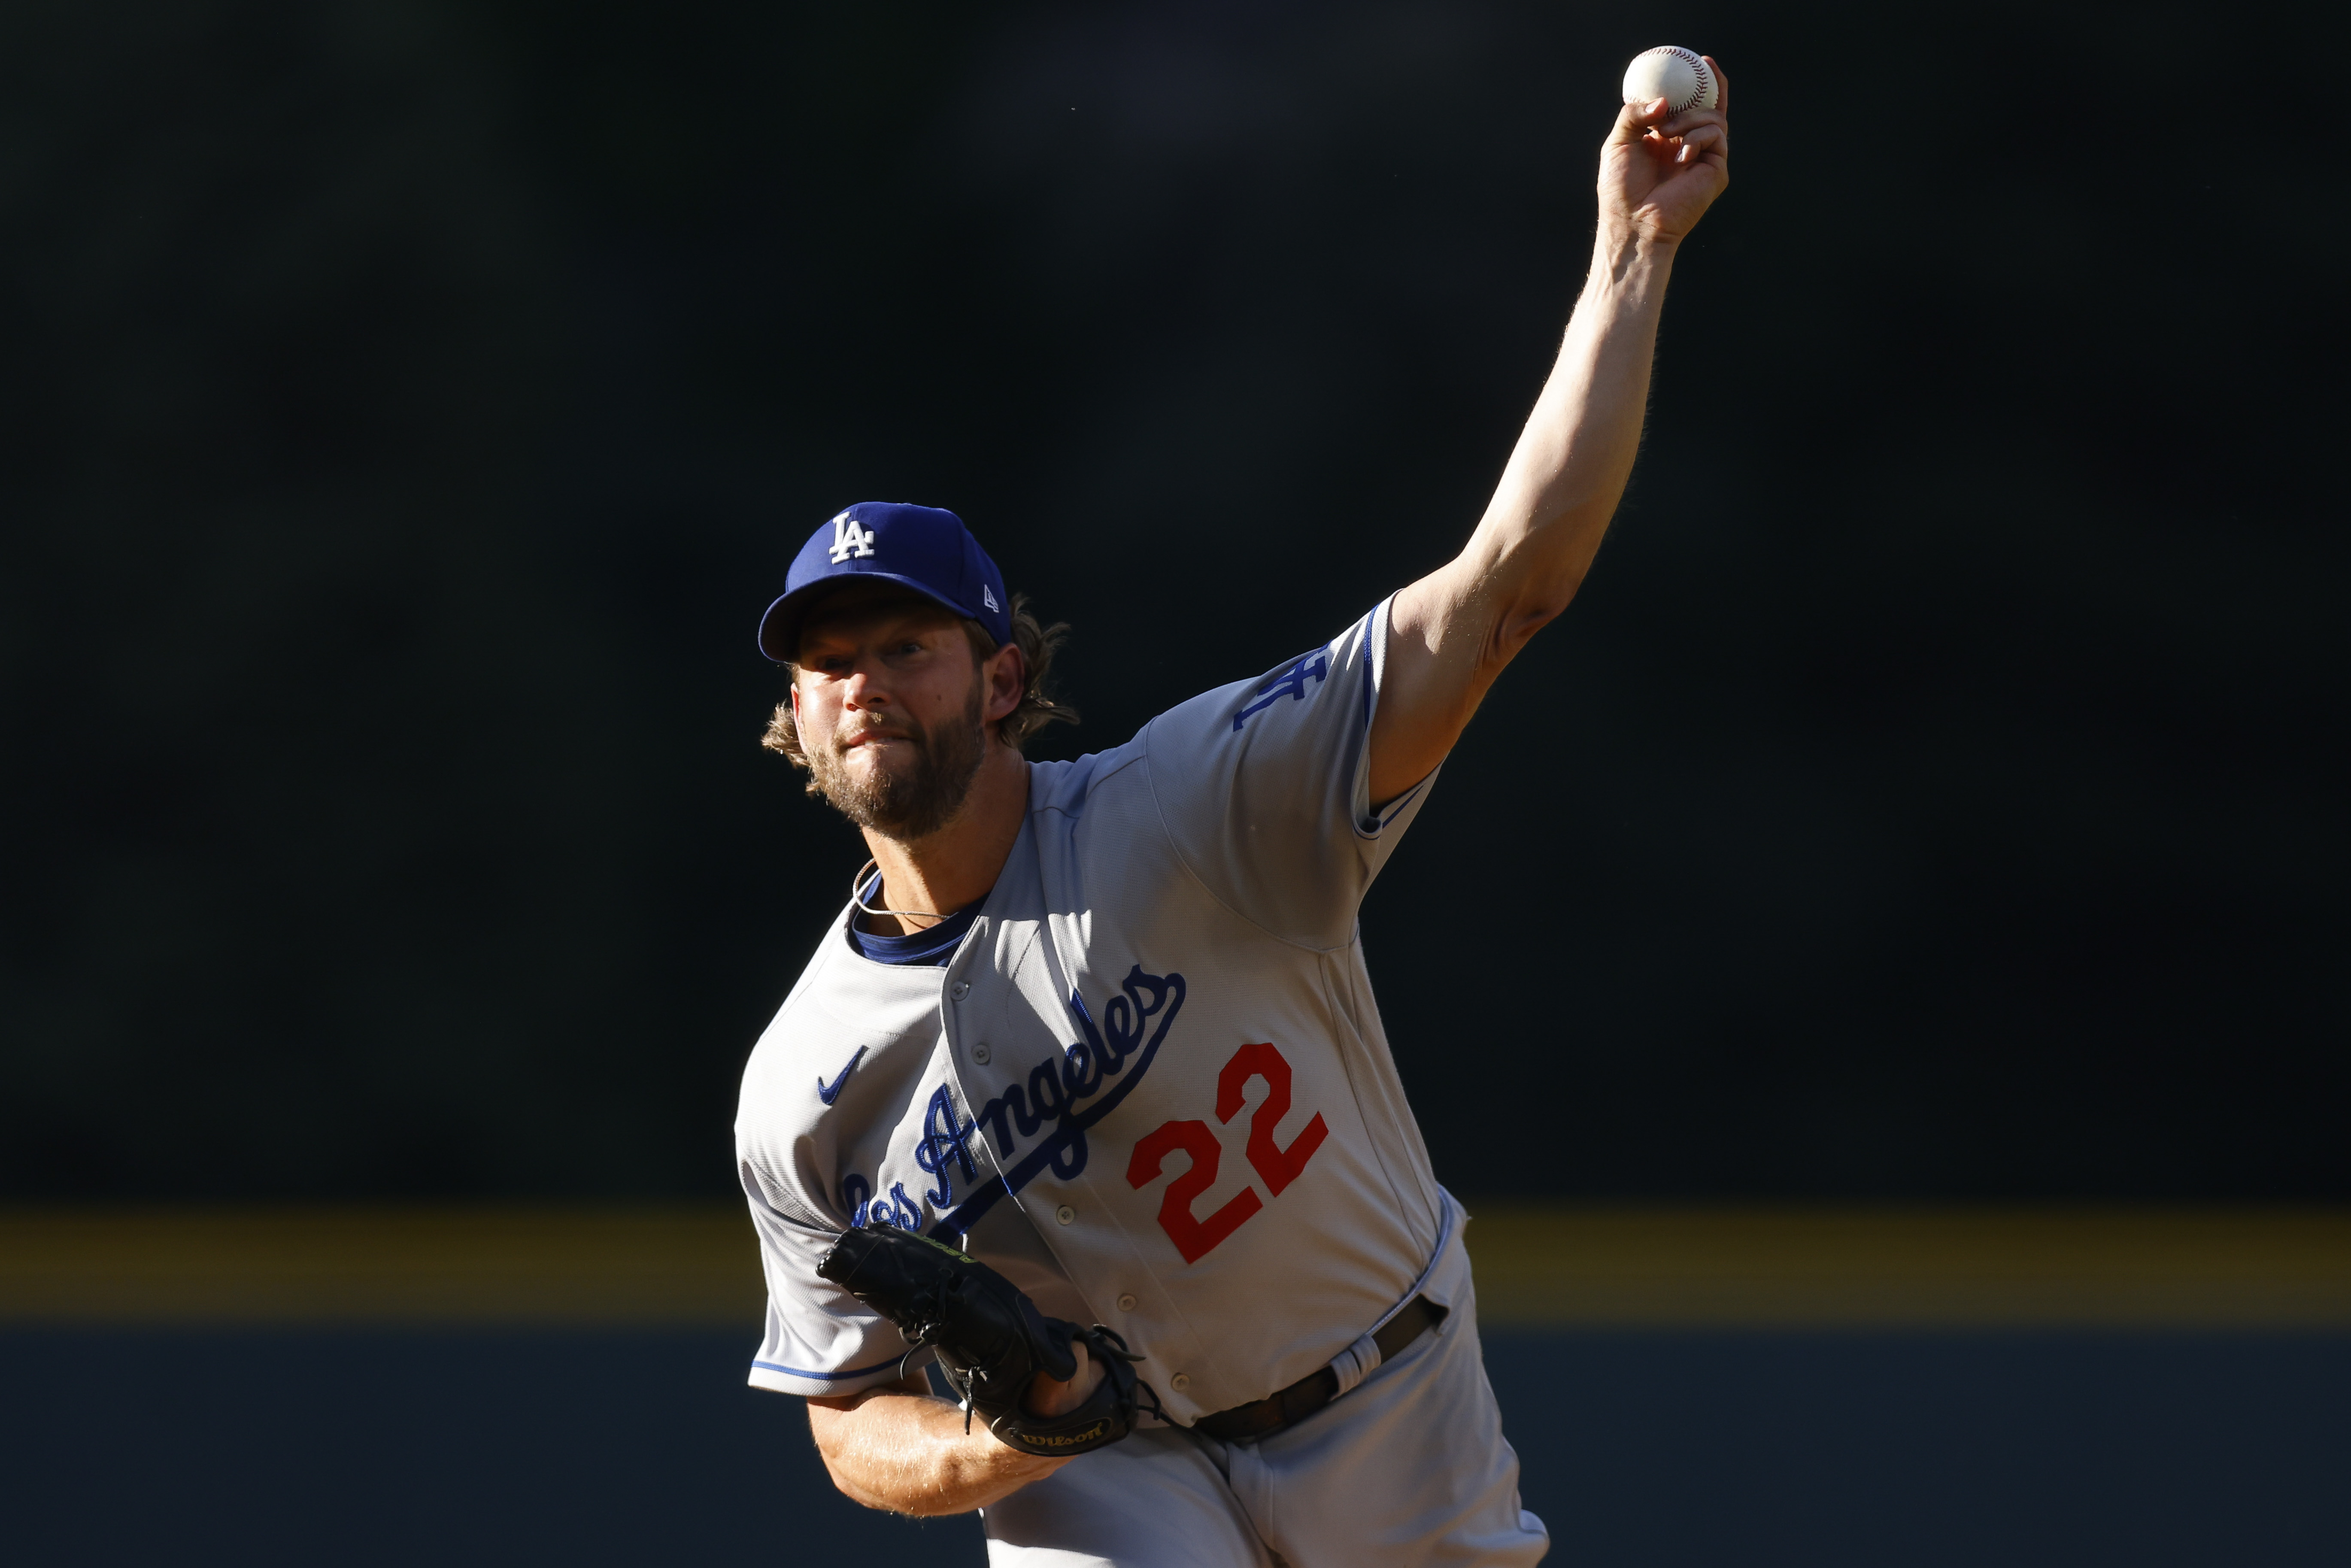 Kershaw disagrees with Dodgers' decision to reinstate gay 'nun